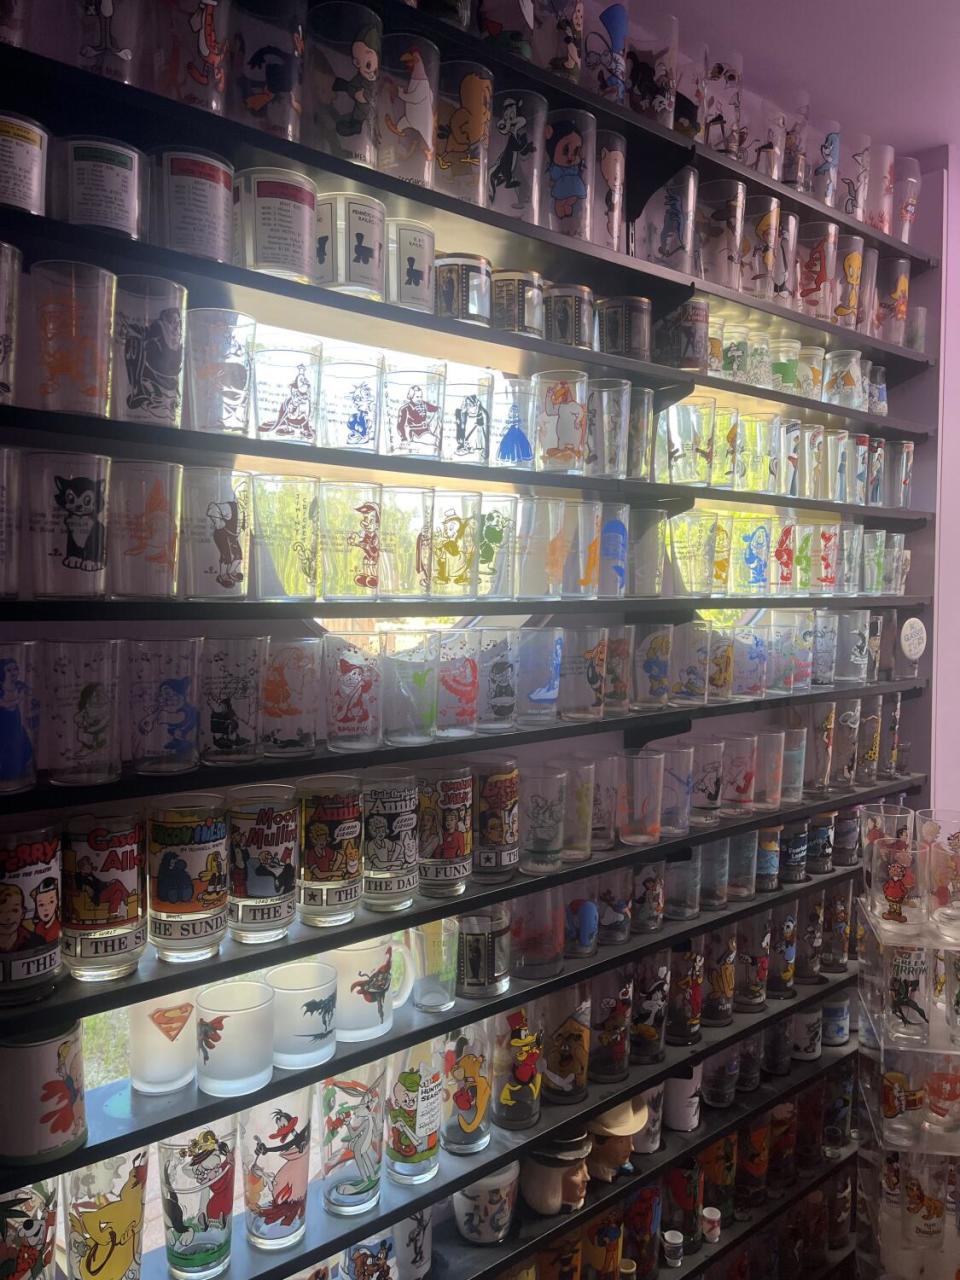 A wall full of jelly glasses from the 1960s.